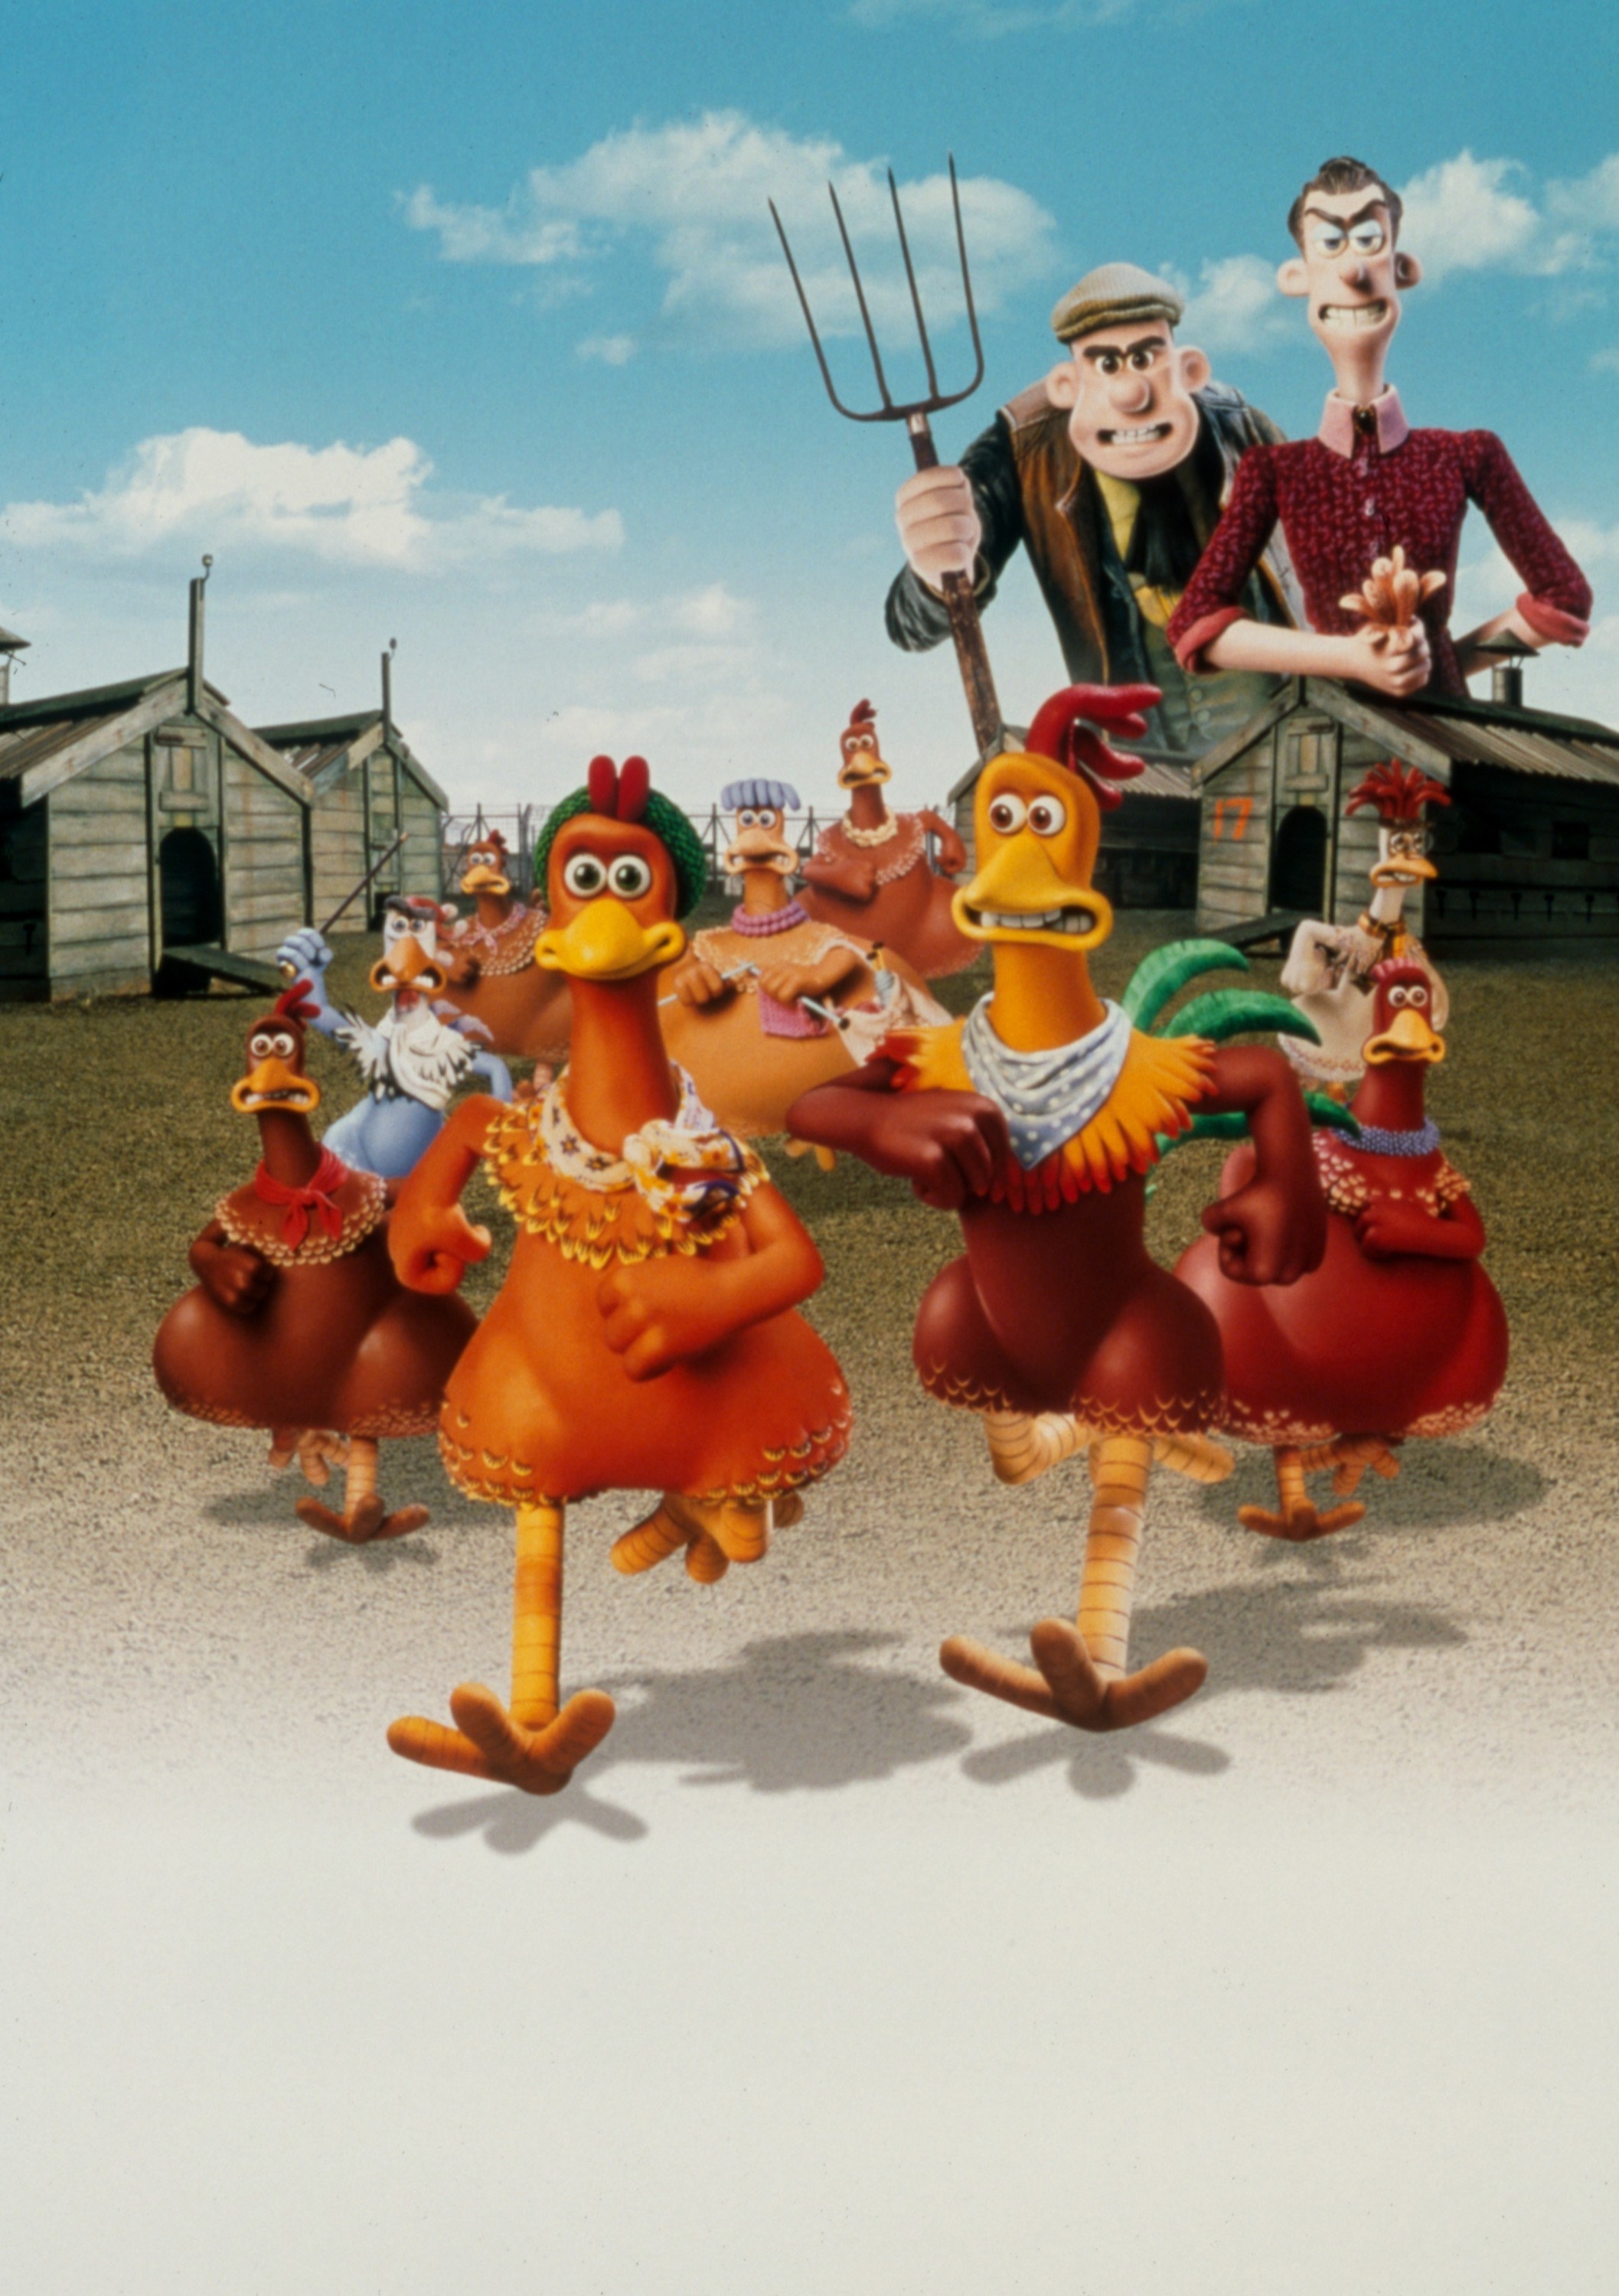 poster for the film with the chickens fleeing the farm